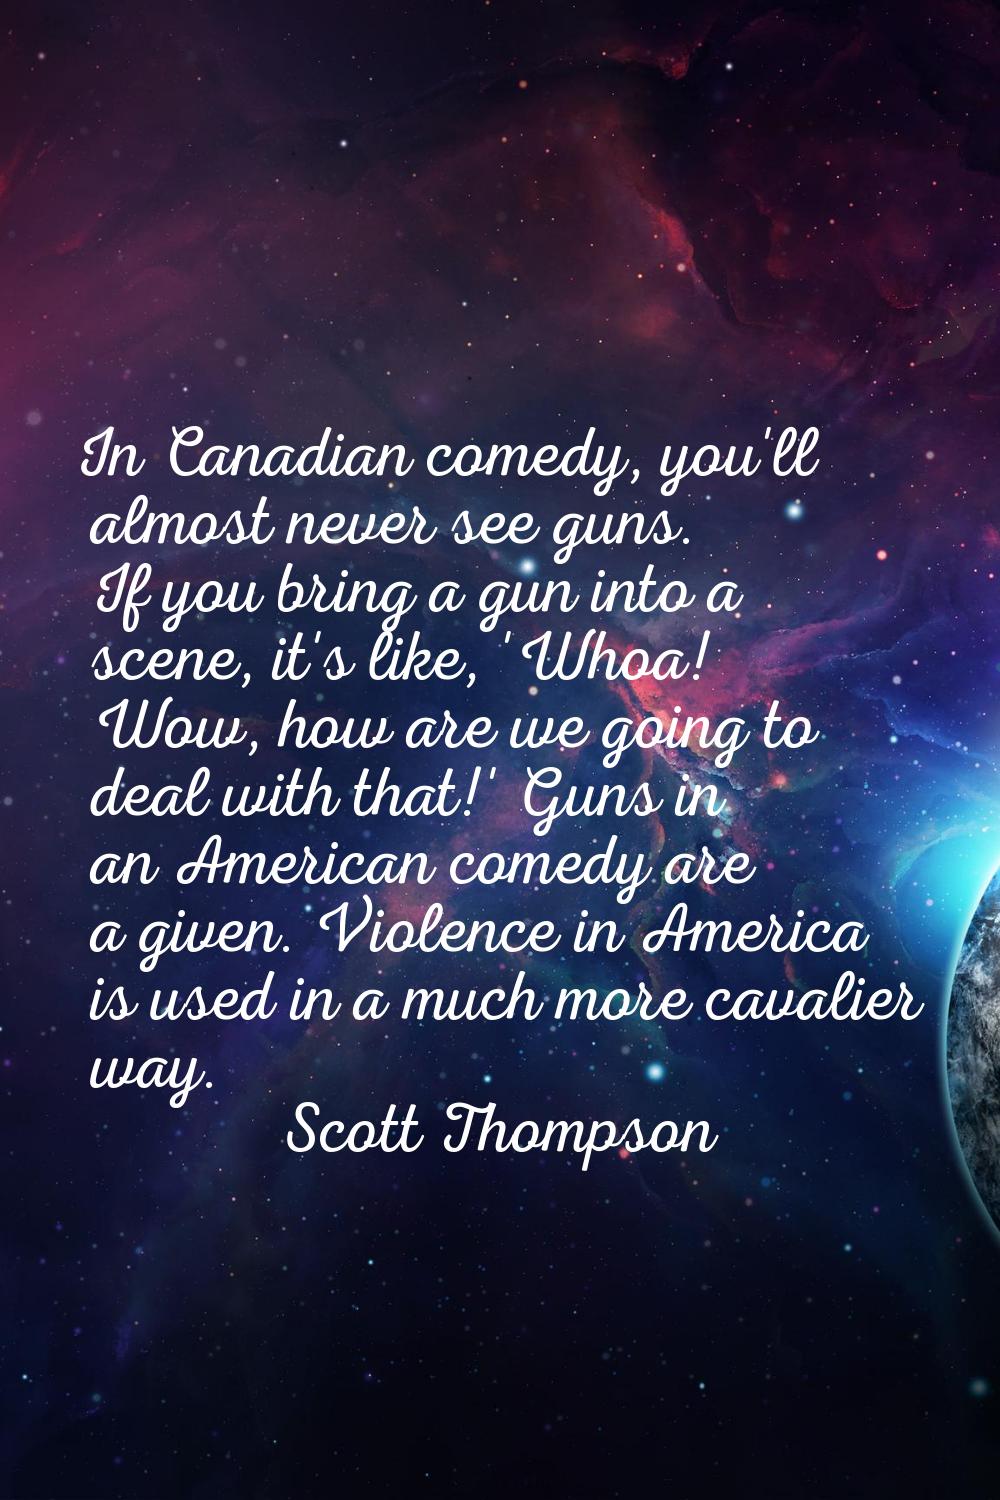 In Canadian comedy, you'll almost never see guns. If you bring a gun into a scene, it's like, 'Whoa